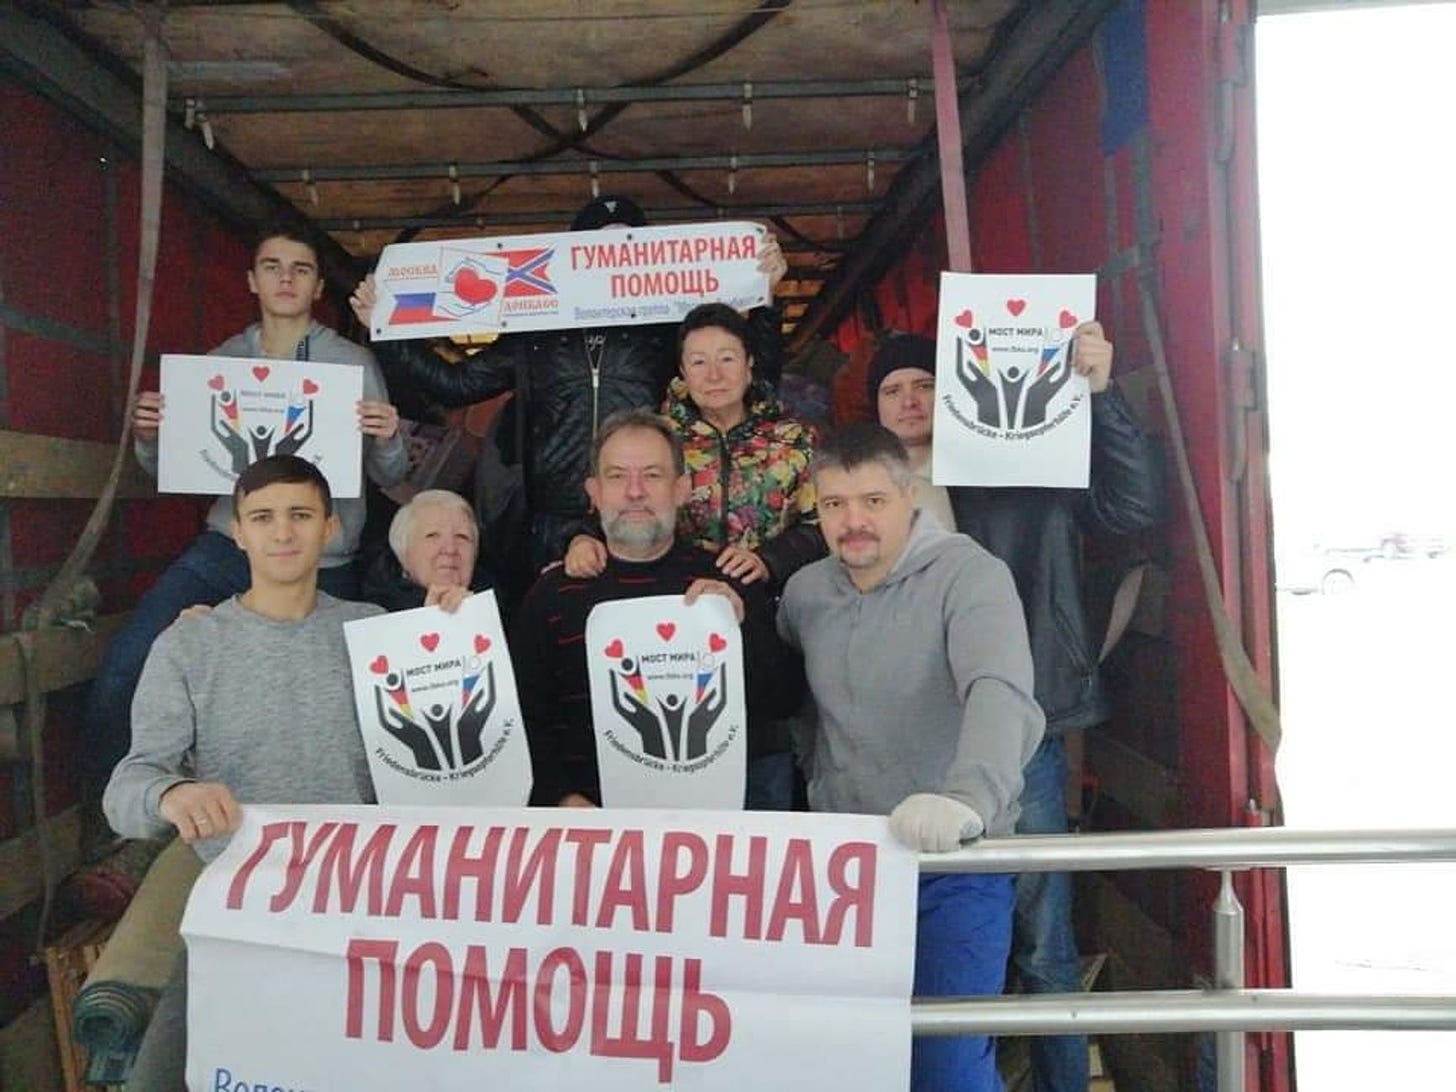 Members of the NKD send a truck to Donbass together with the Bridge of Peace Foundation